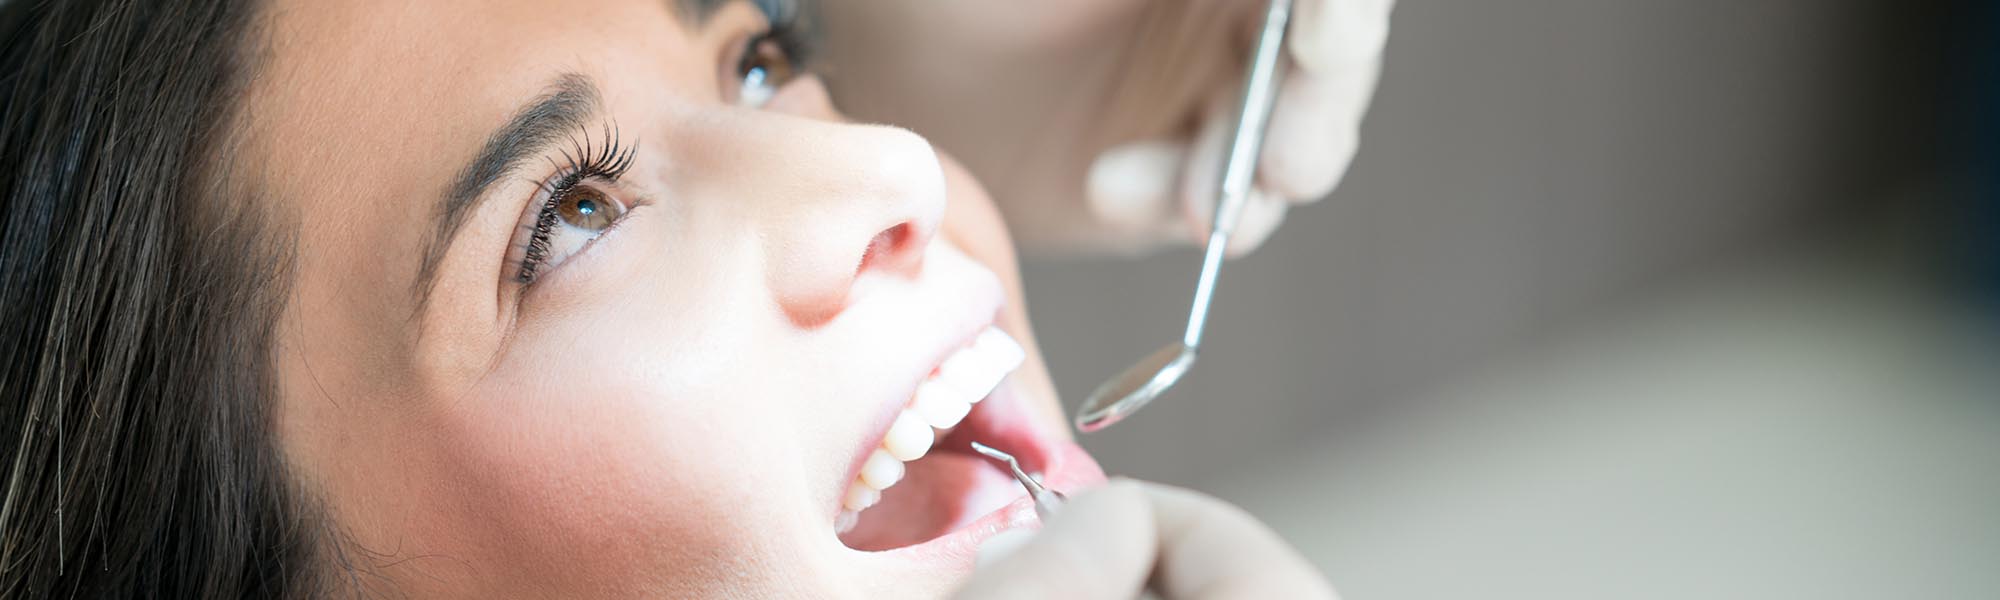 Routine Teeth Cleaning Downey CA